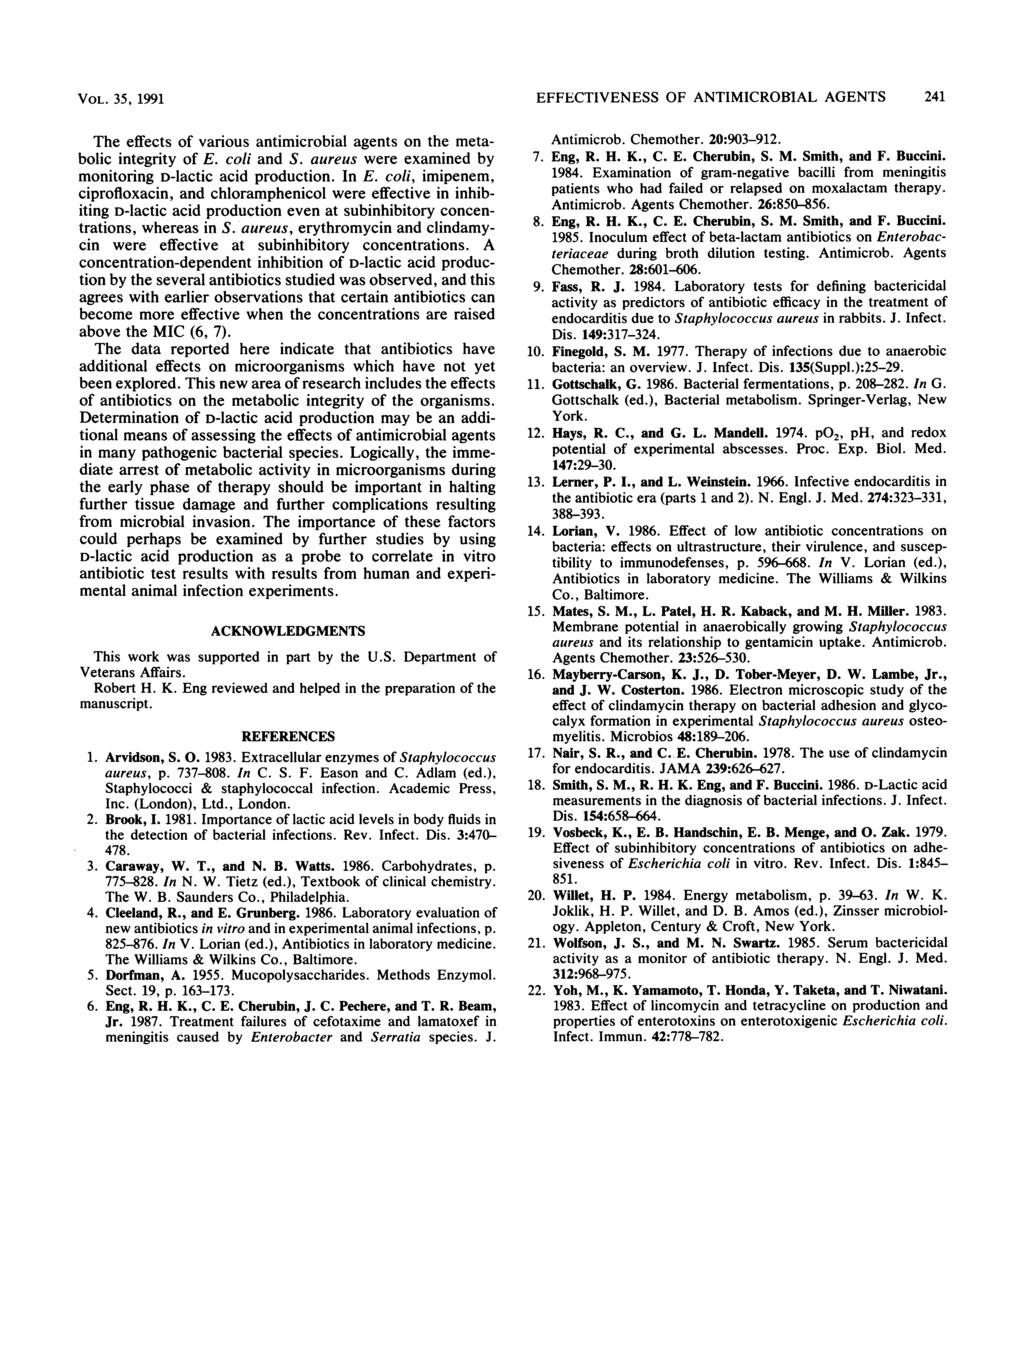 VOL. 35, 1991 The effects of various antimicrobial agents on the metabolic integrity of E. coli and S. aureus were examined by monitoring D-lactic acid production. In E.